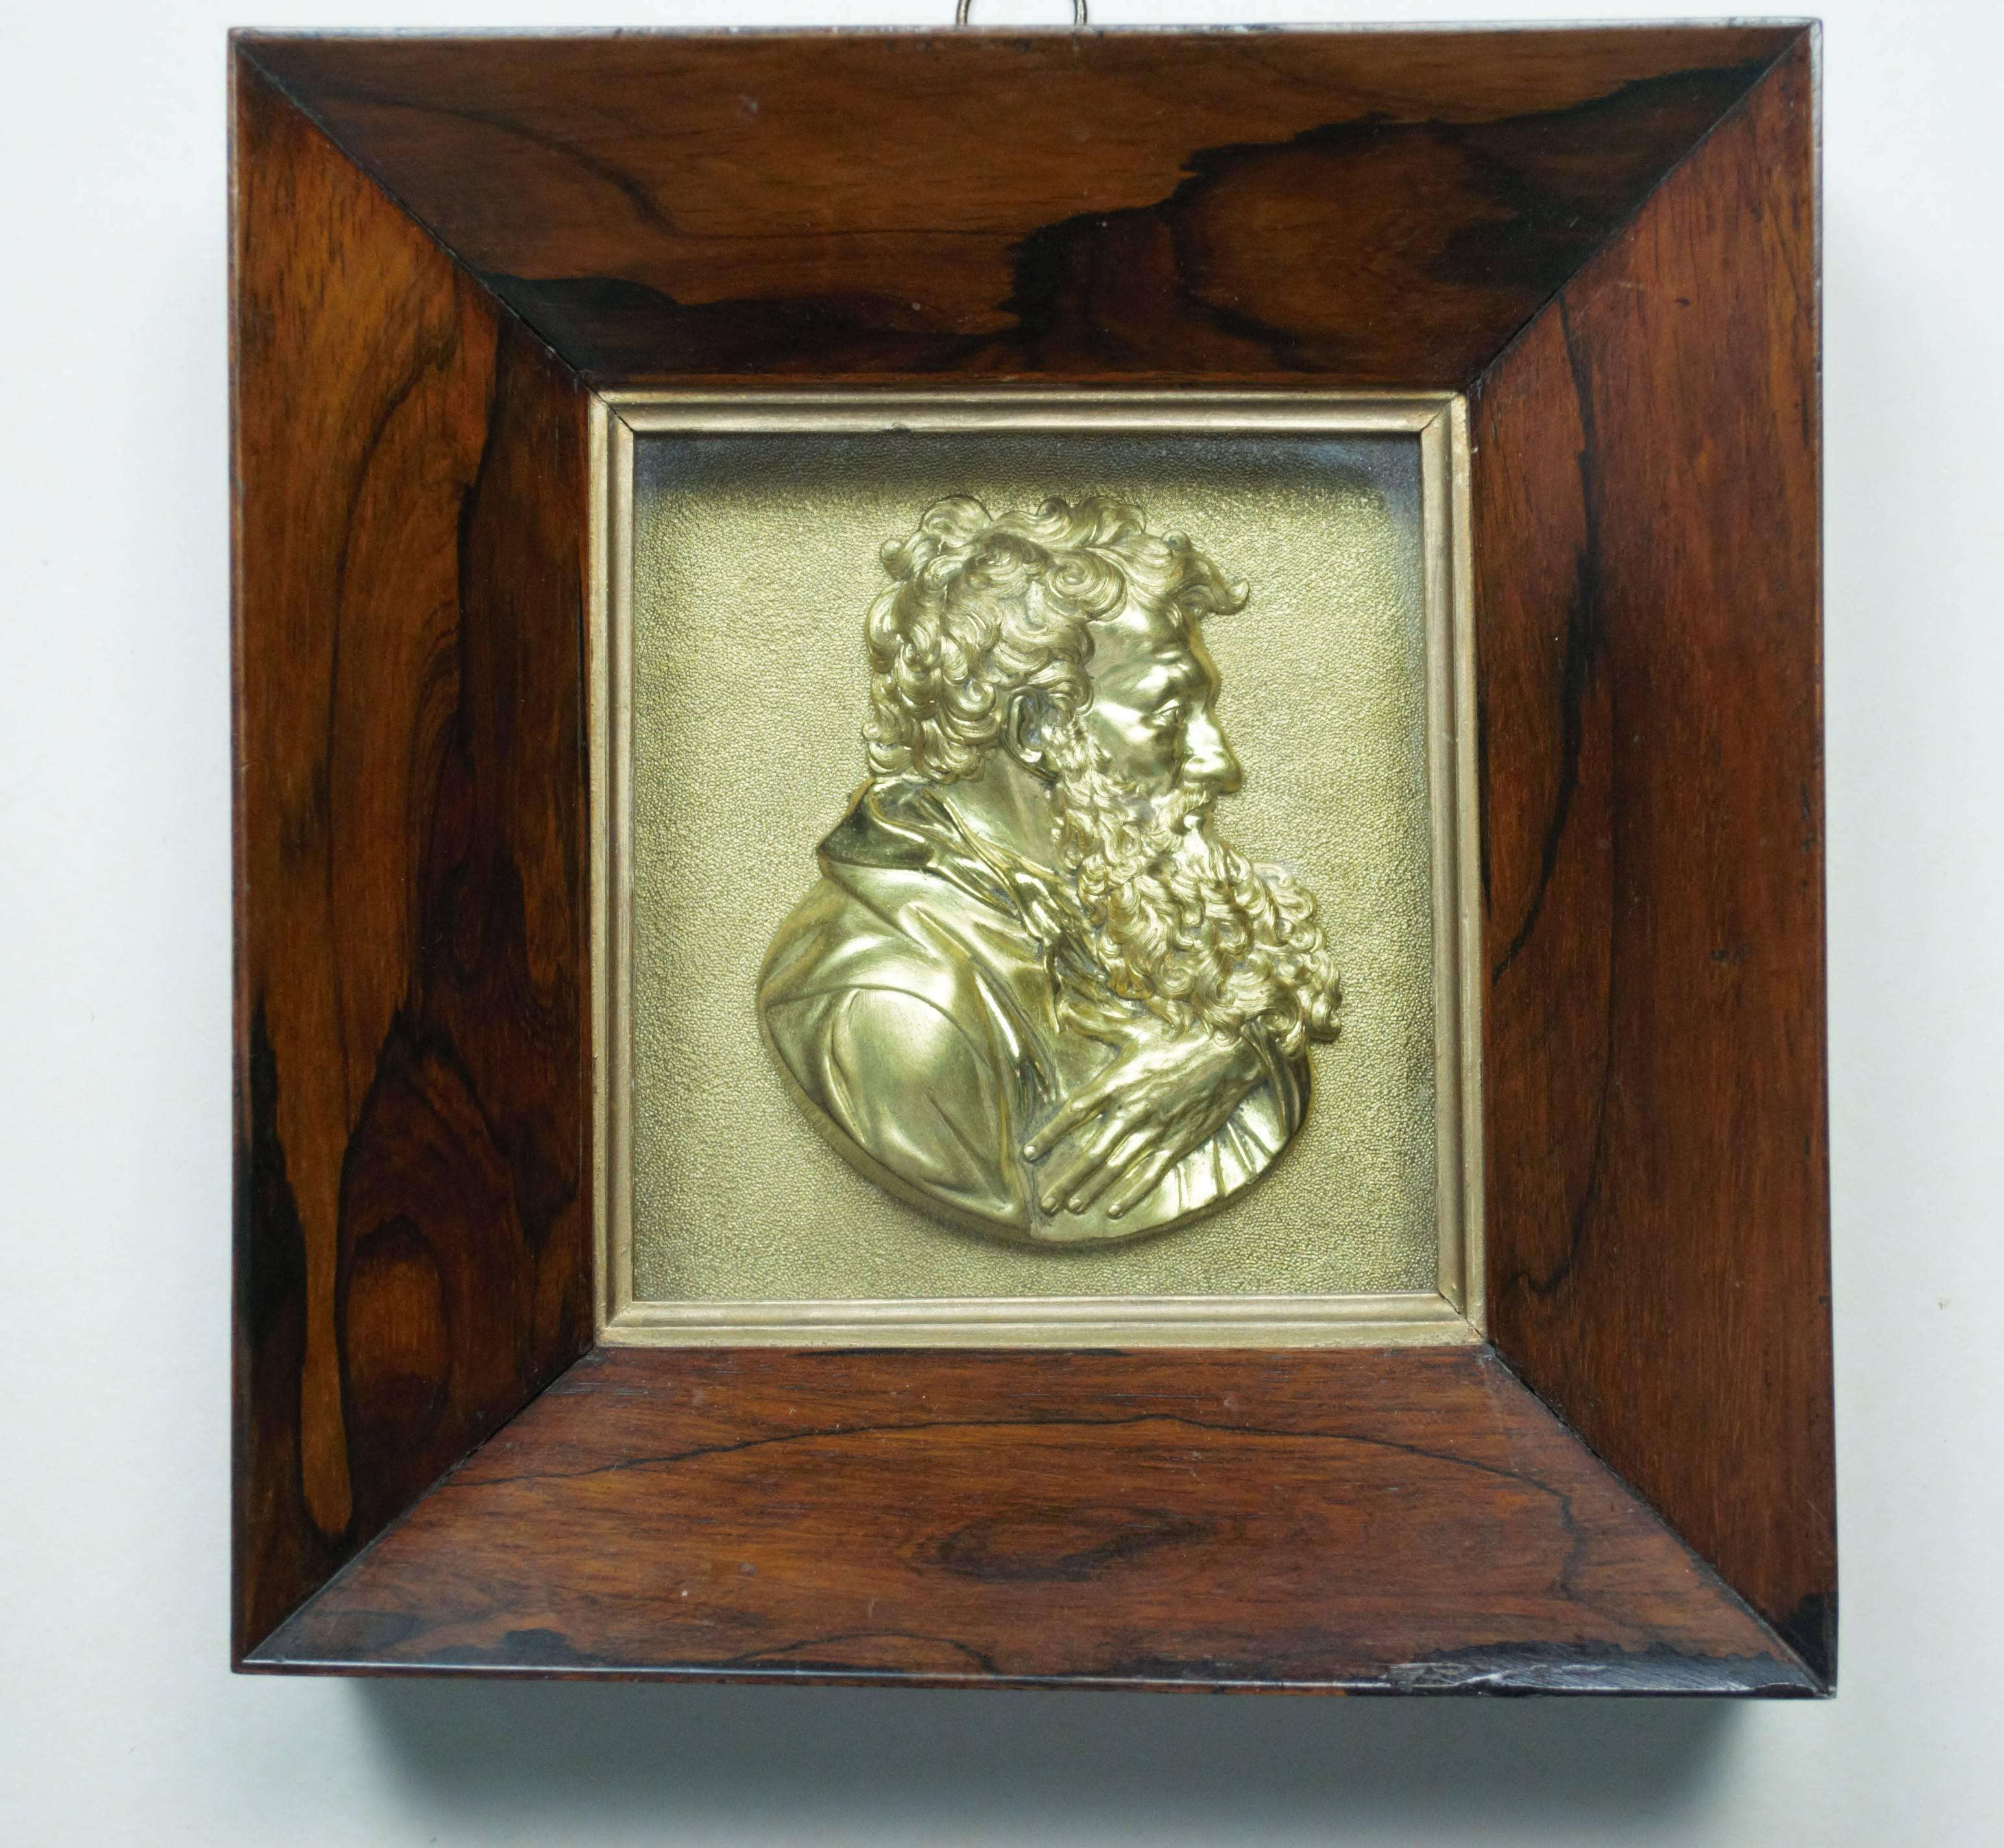 An unusual pair of gilded bronze profile bust portraits of unknown philosophers or scholars (possibly St Peter and St Paul), mounted in original deep rosewood frames. The cast and polished busts set on a textured matte background, in good original